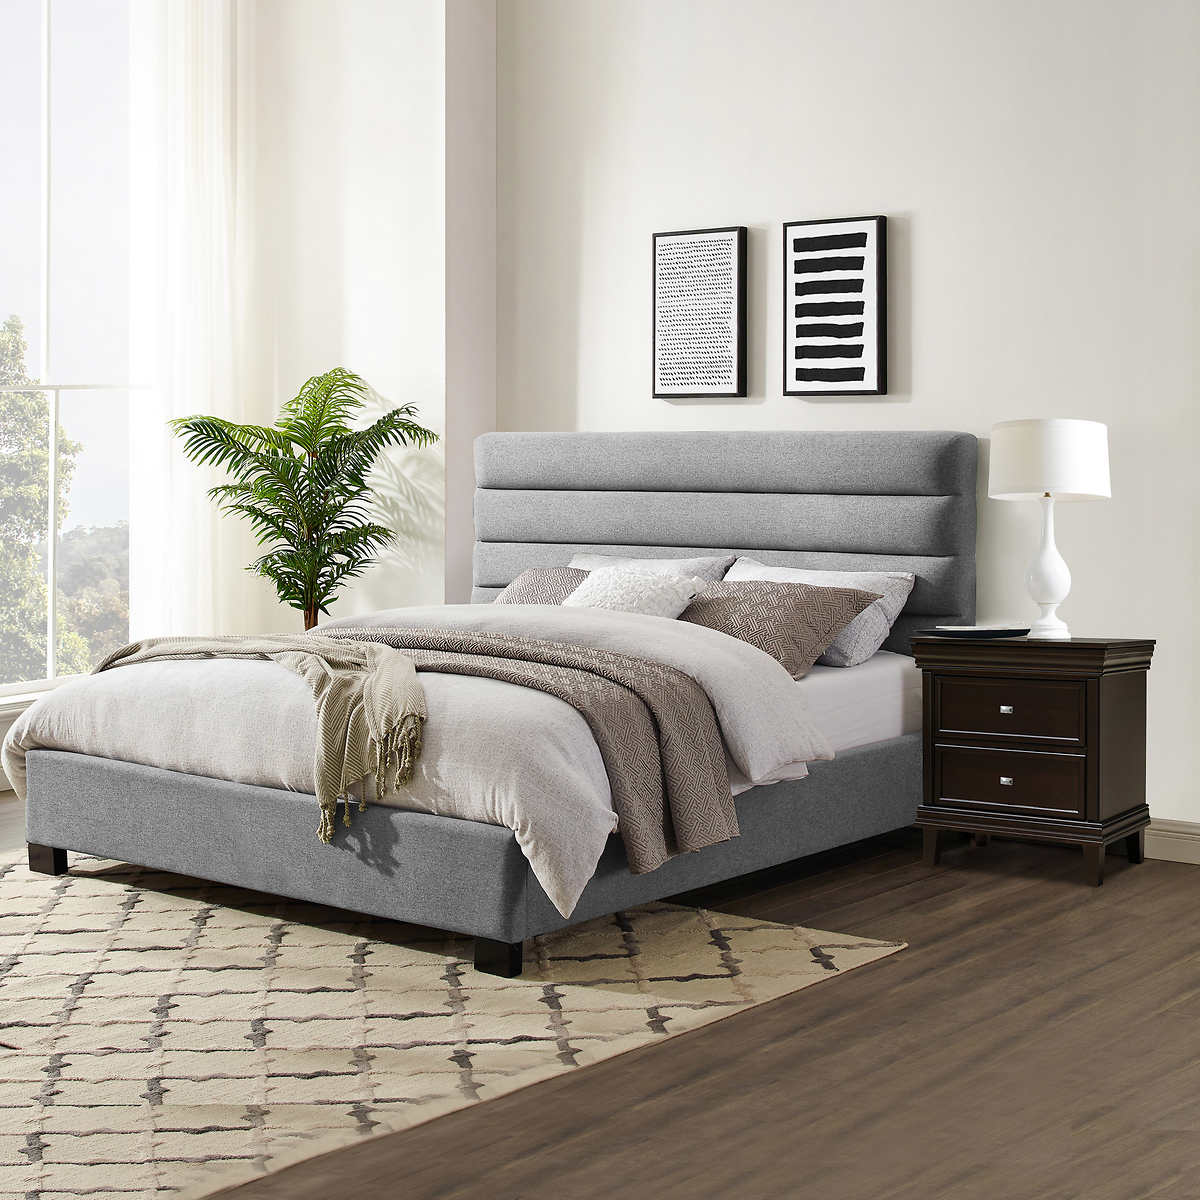 Albury Upholstered Queen Bed Grey Costco, Costco King Bed Frame Canada